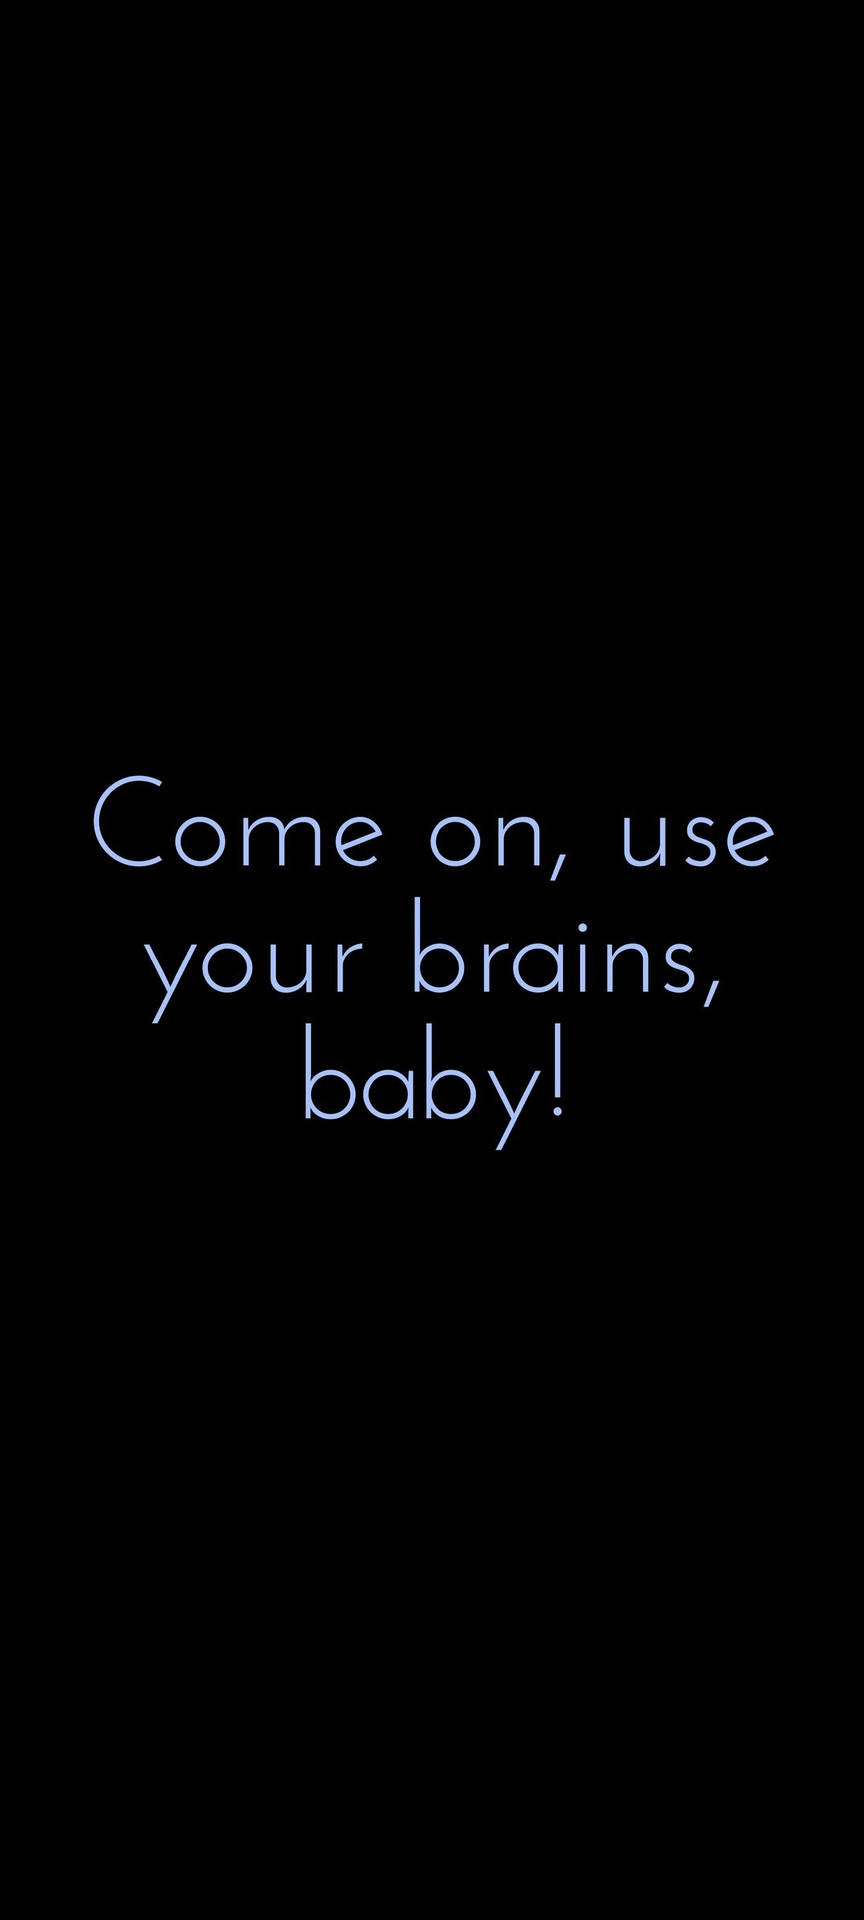 Use Your Brains Cerebral Quote Wallpaper